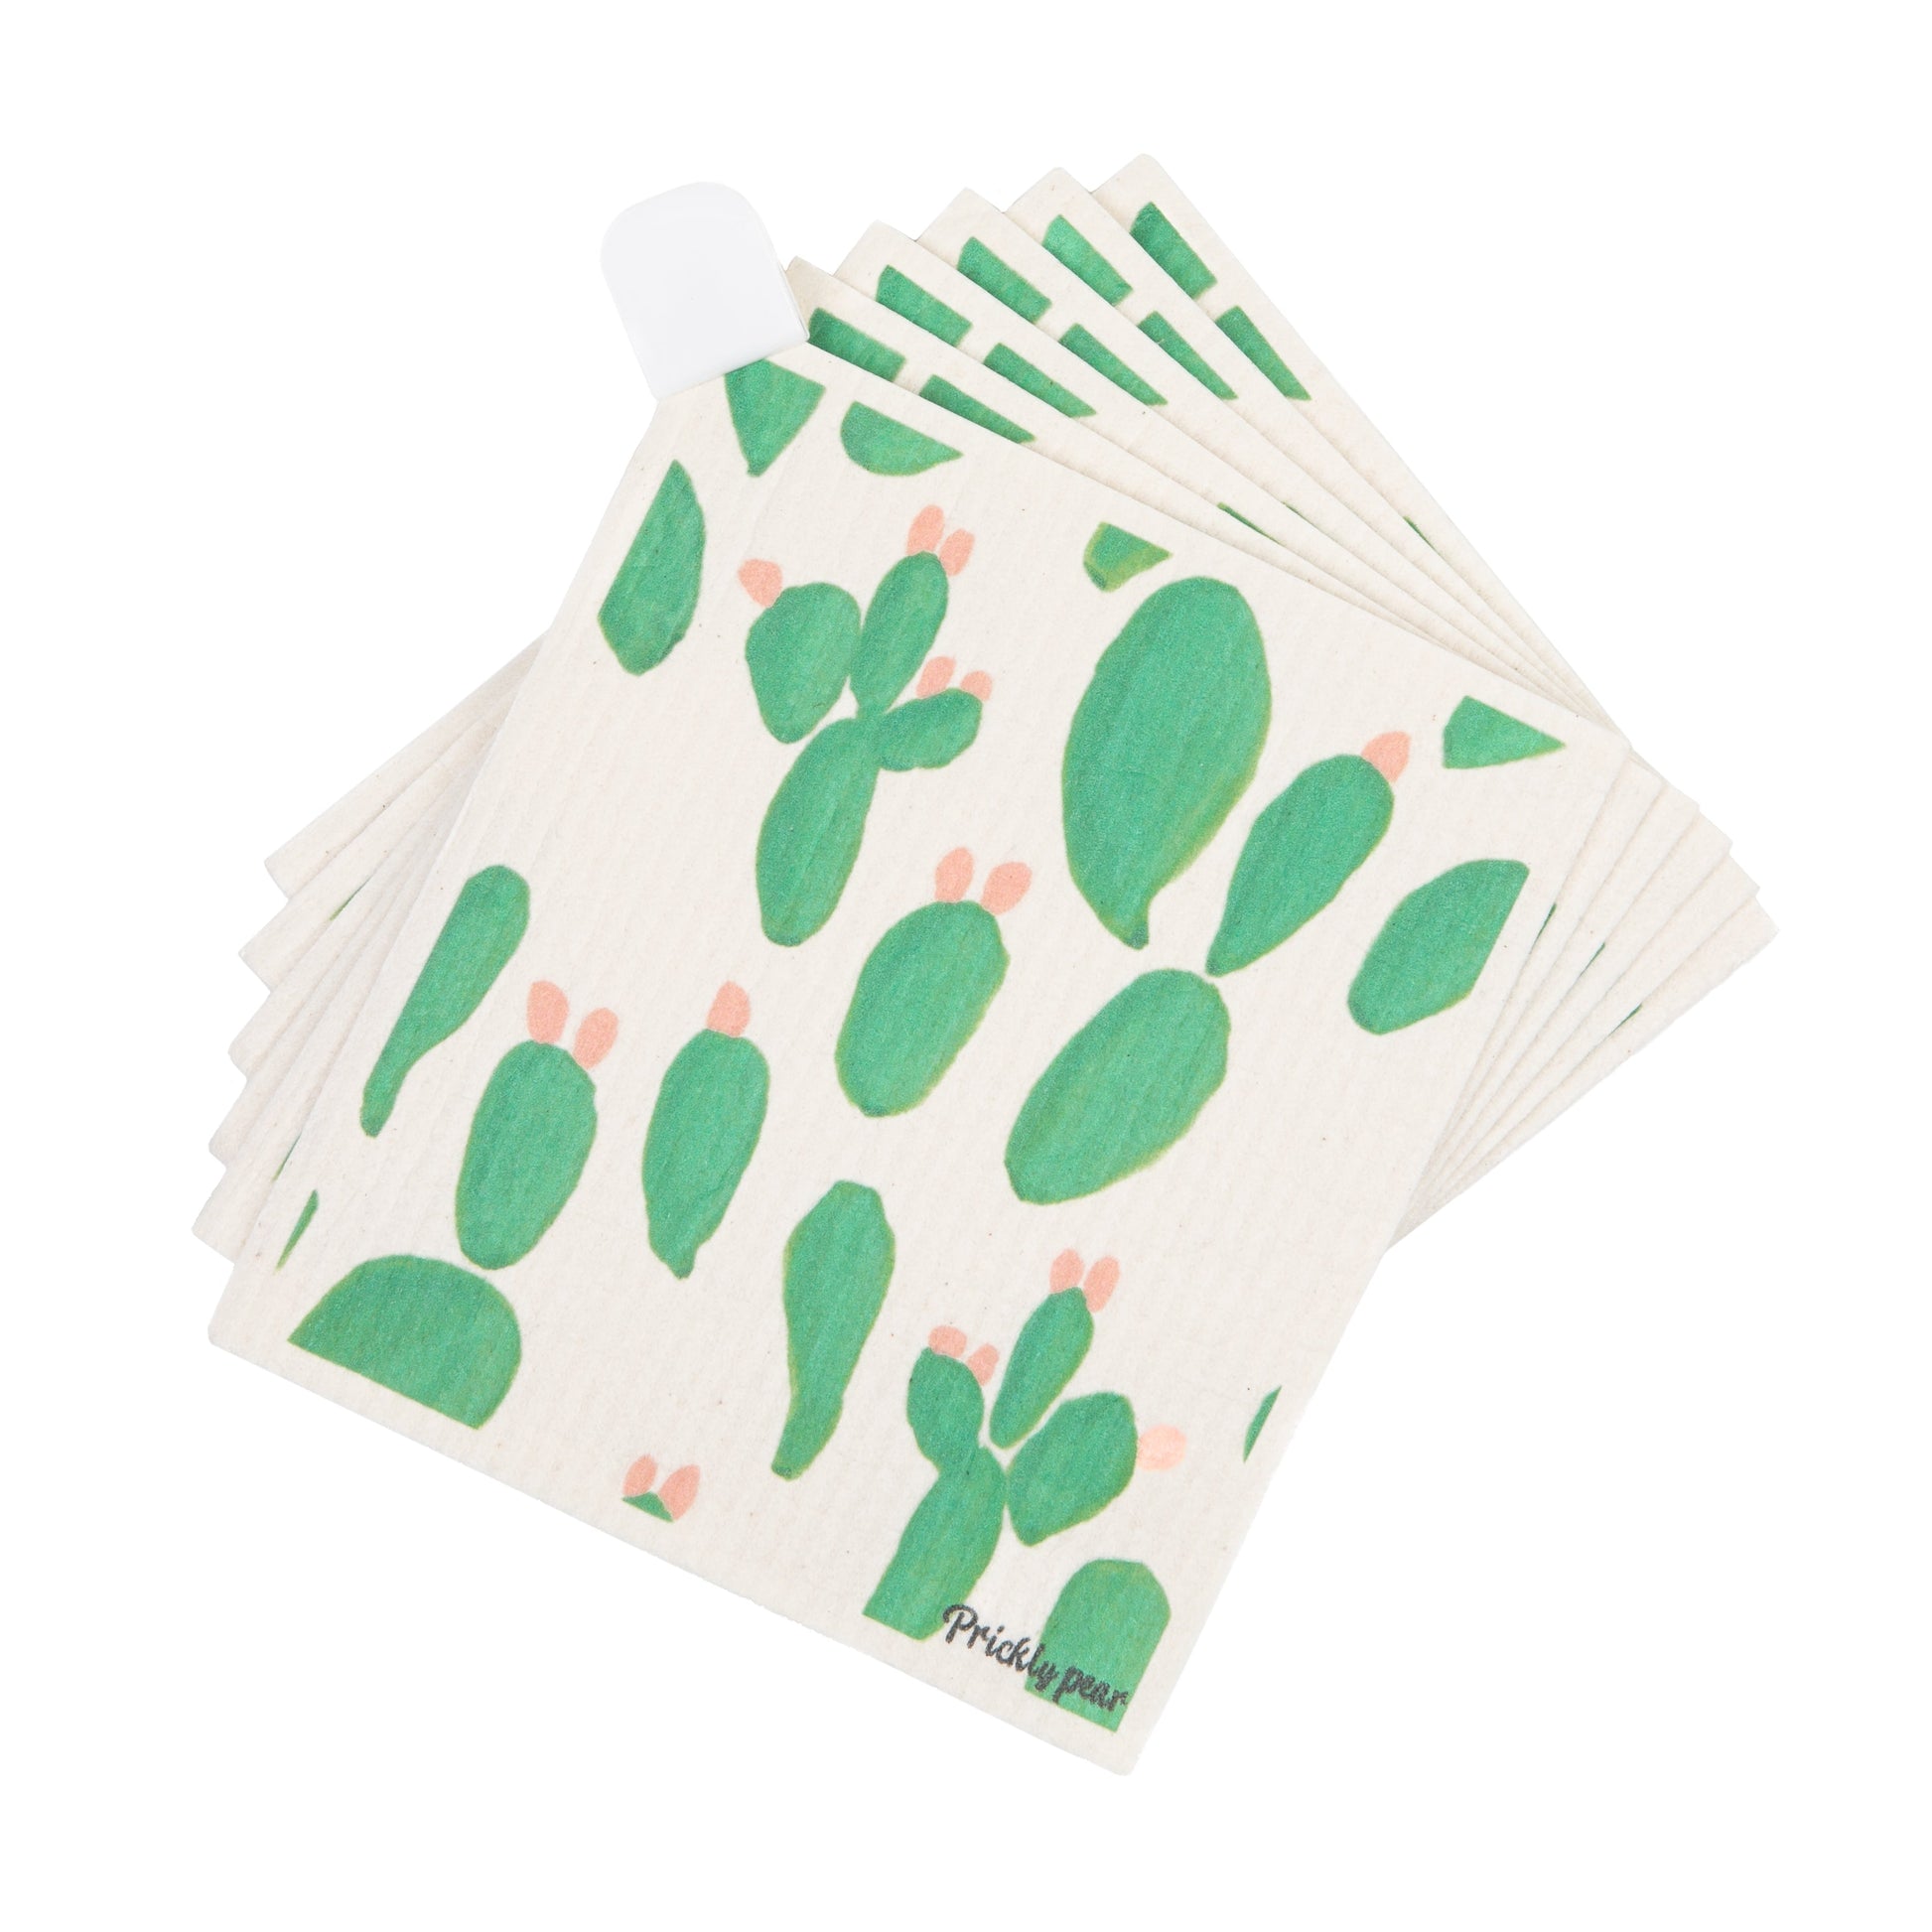 kitchen paper towel prickly pear essentials 6 pack small